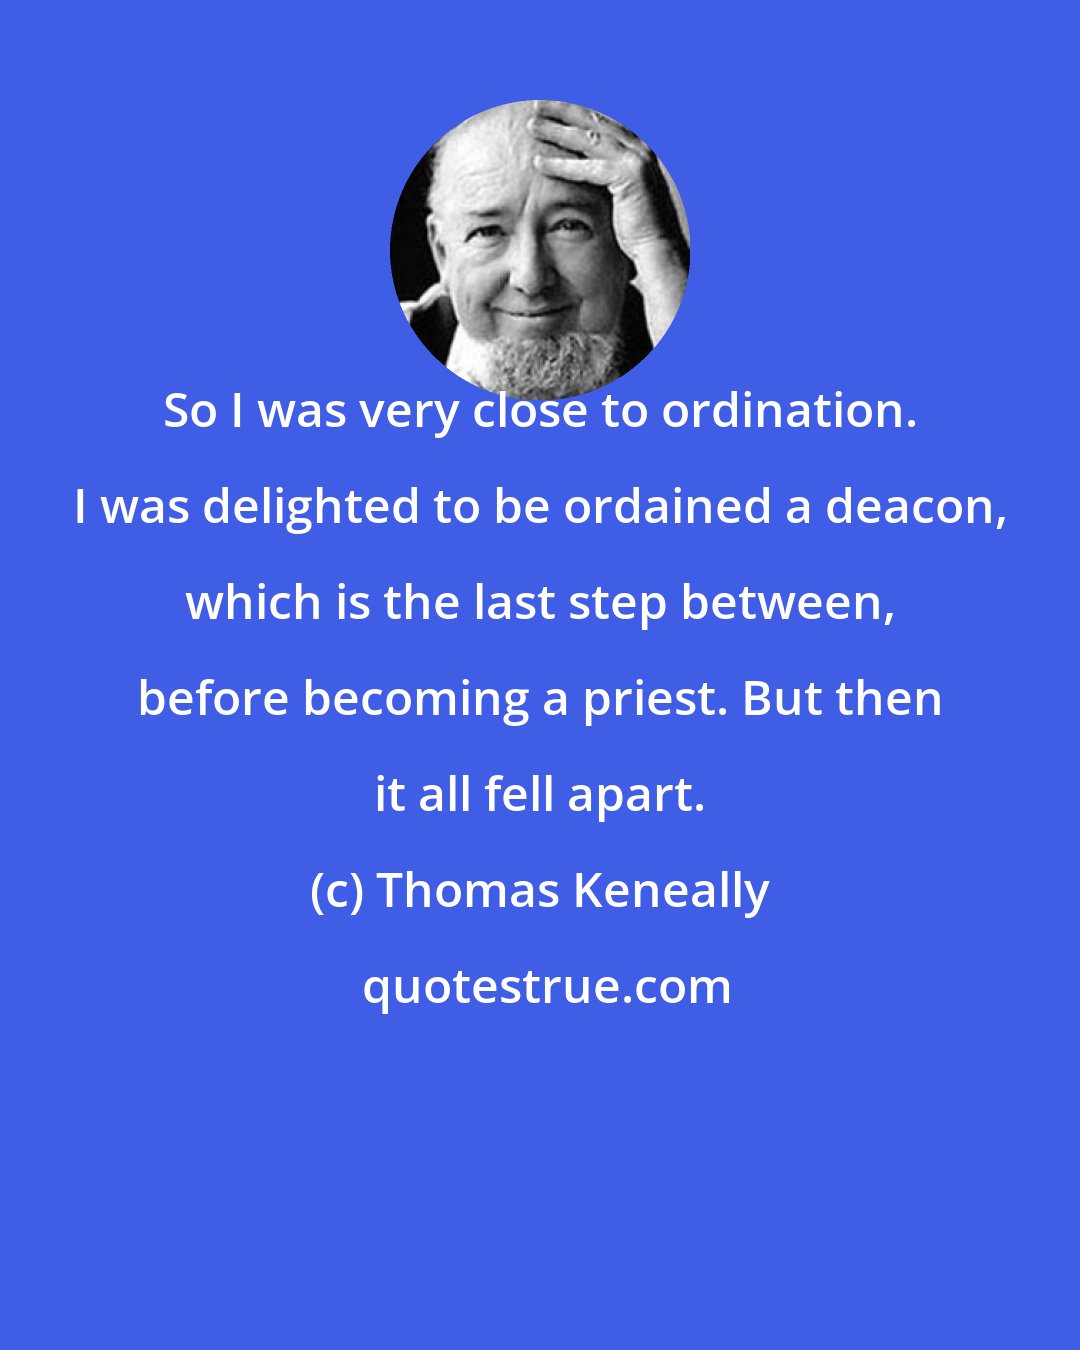 Thomas Keneally: So I was very close to ordination. I was delighted to be ordained a deacon, which is the last step between, before becoming a priest. But then it all fell apart.